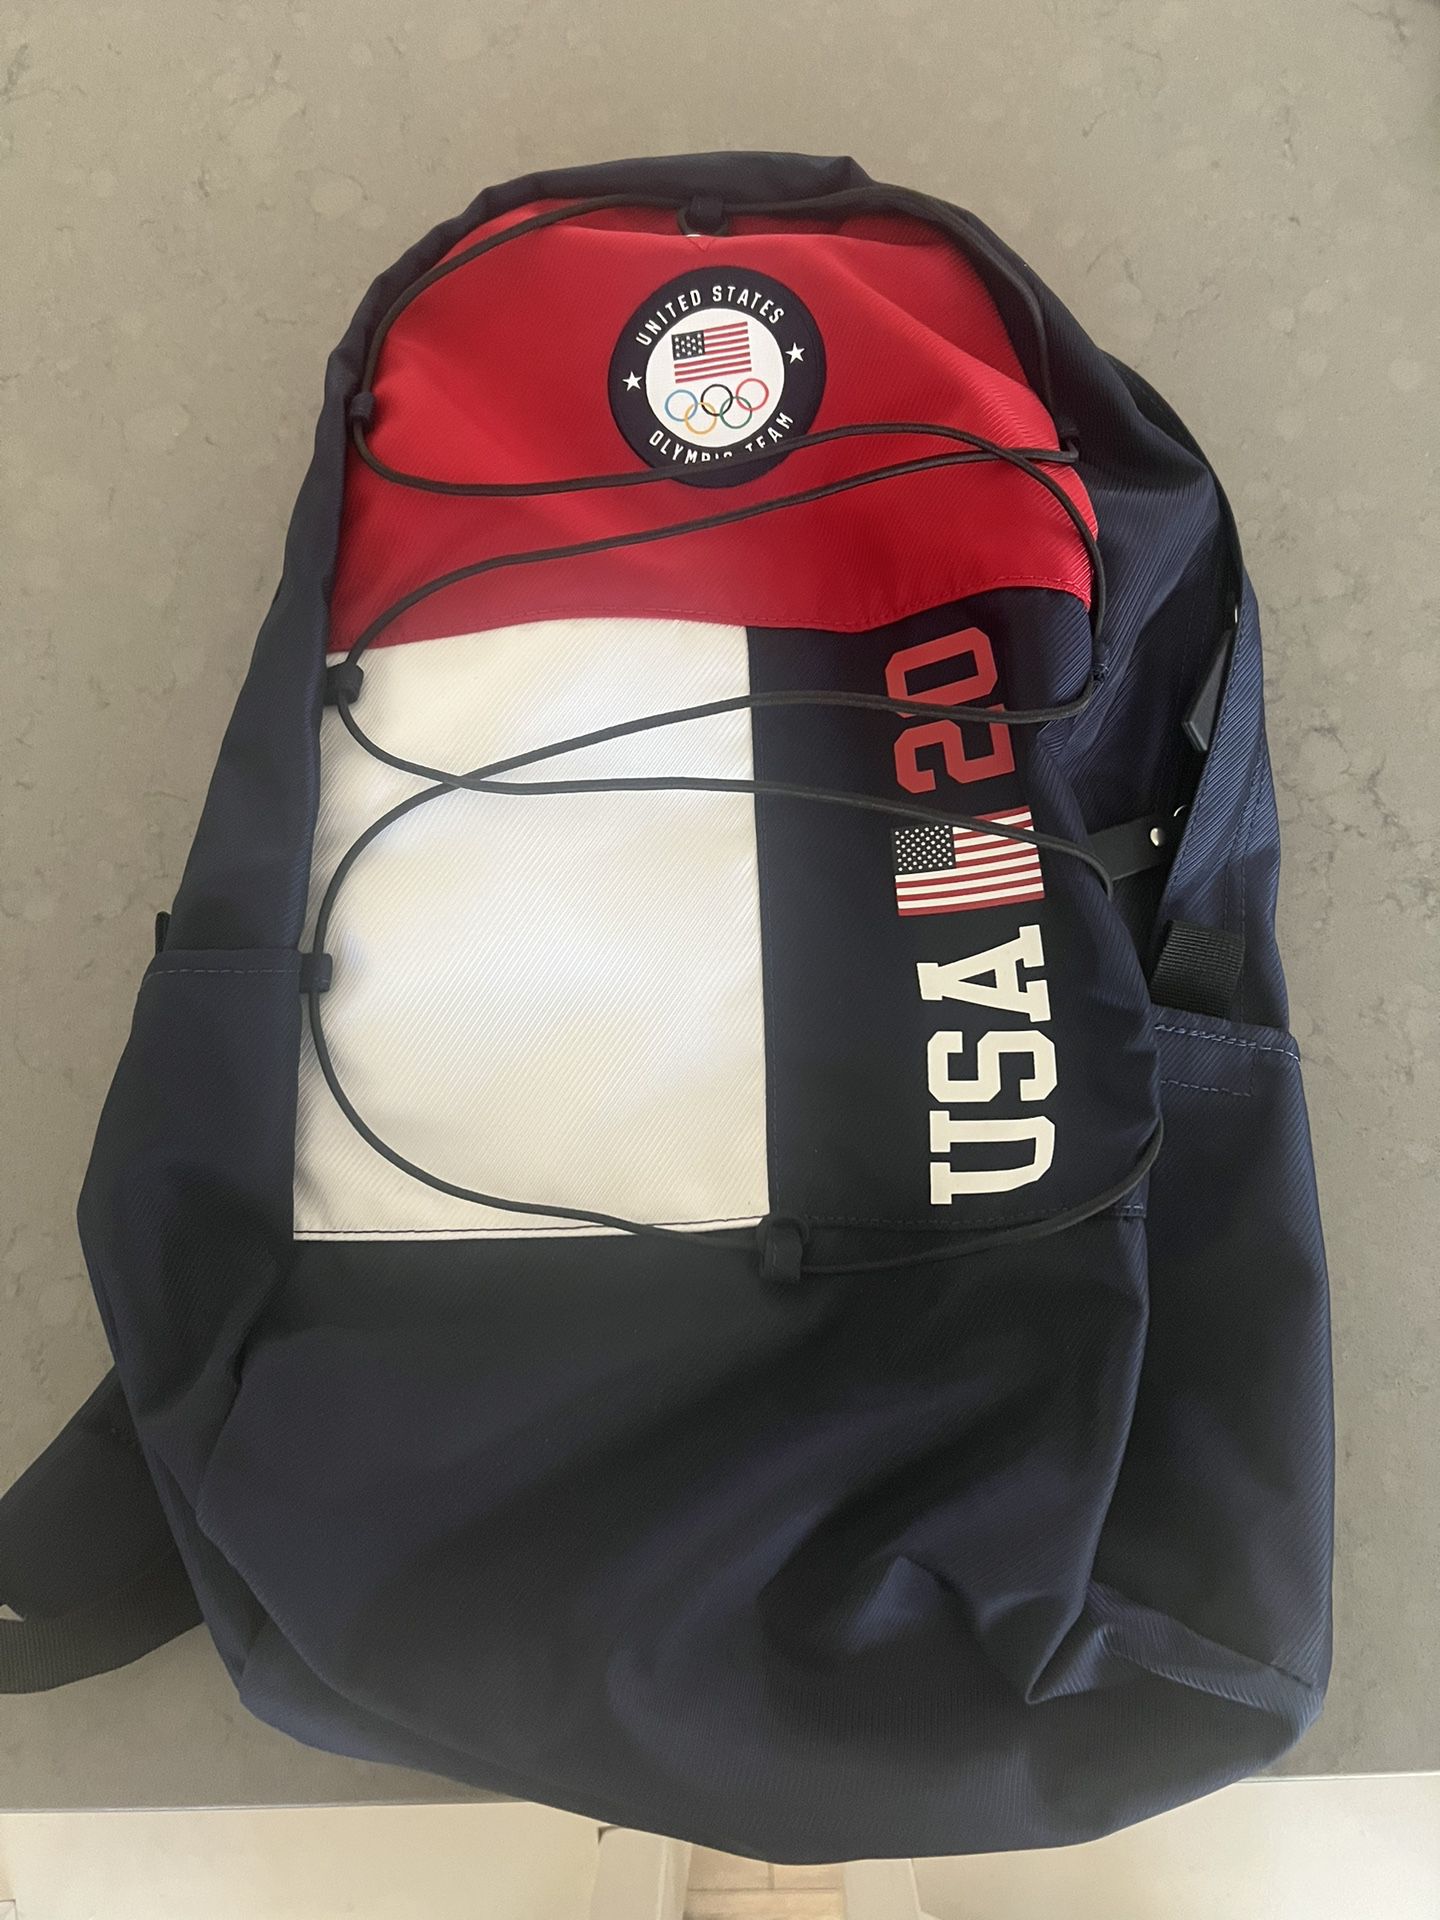 Team USA Ralph Lauren Backpack for Sale in San Diego, CA - OfferUp